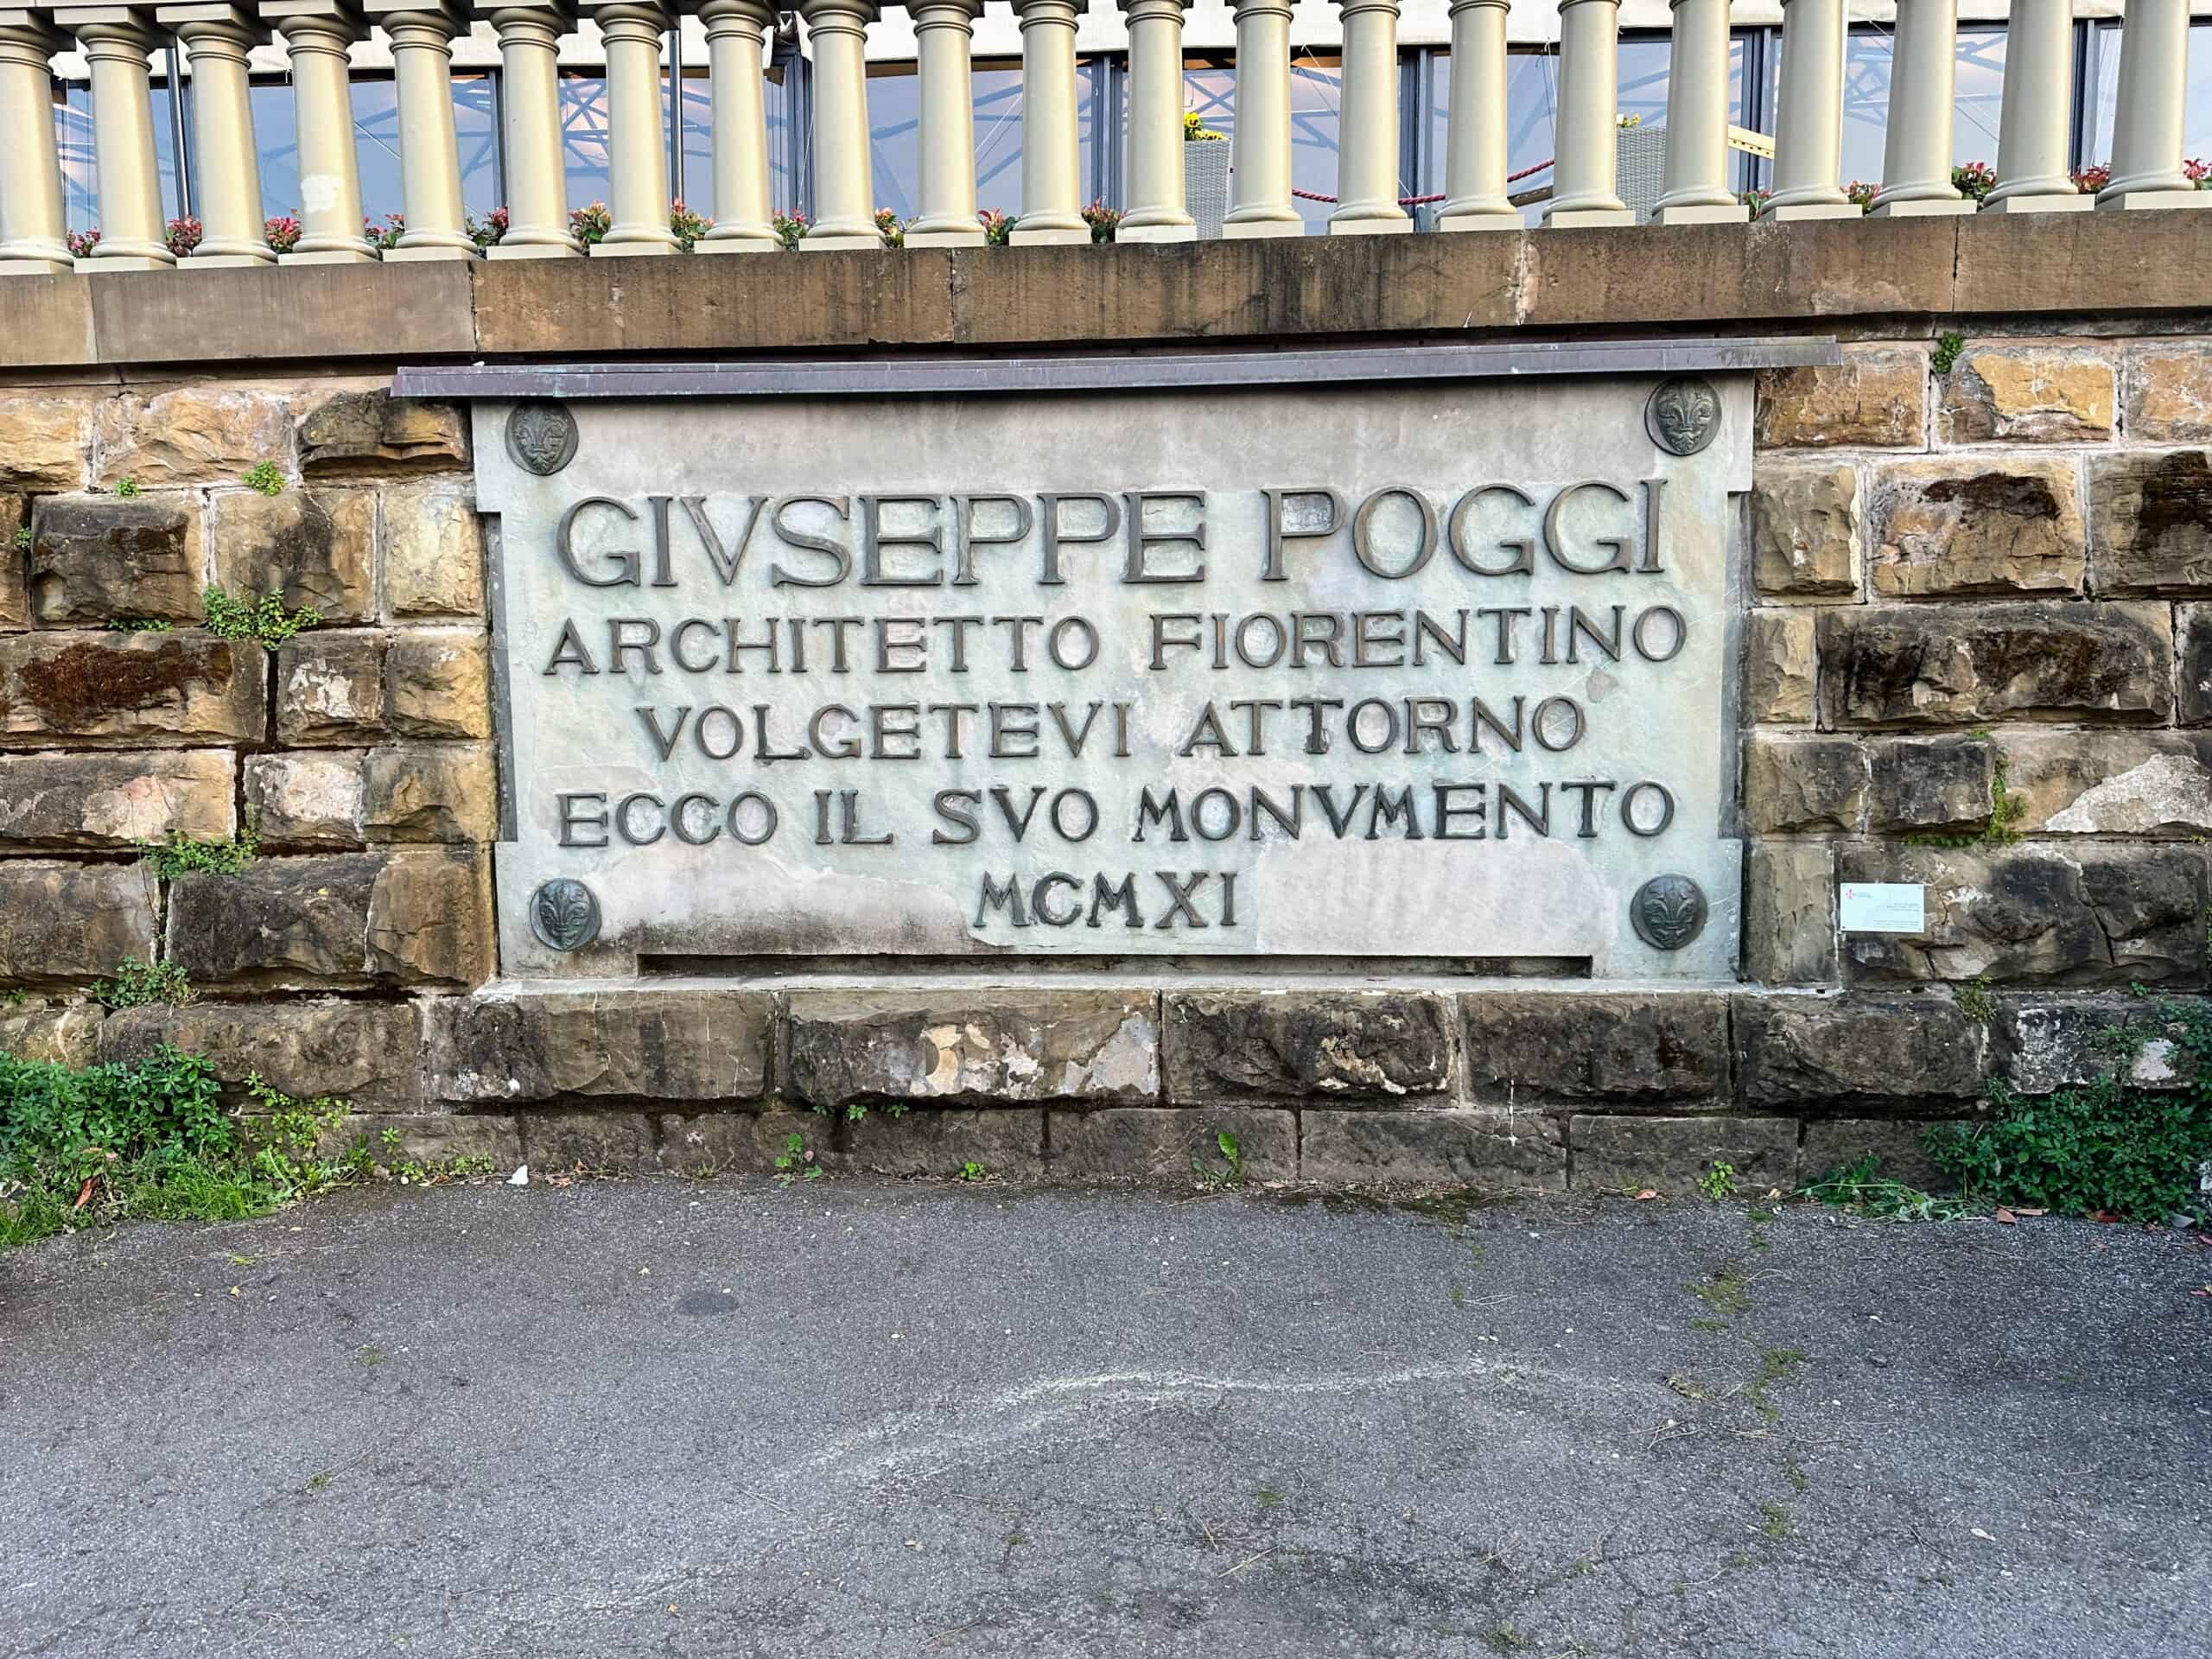 Poggi's Plaque on the Loggia in Piazzale Michelangelo. It says he's the architect and to look around and see his monument.